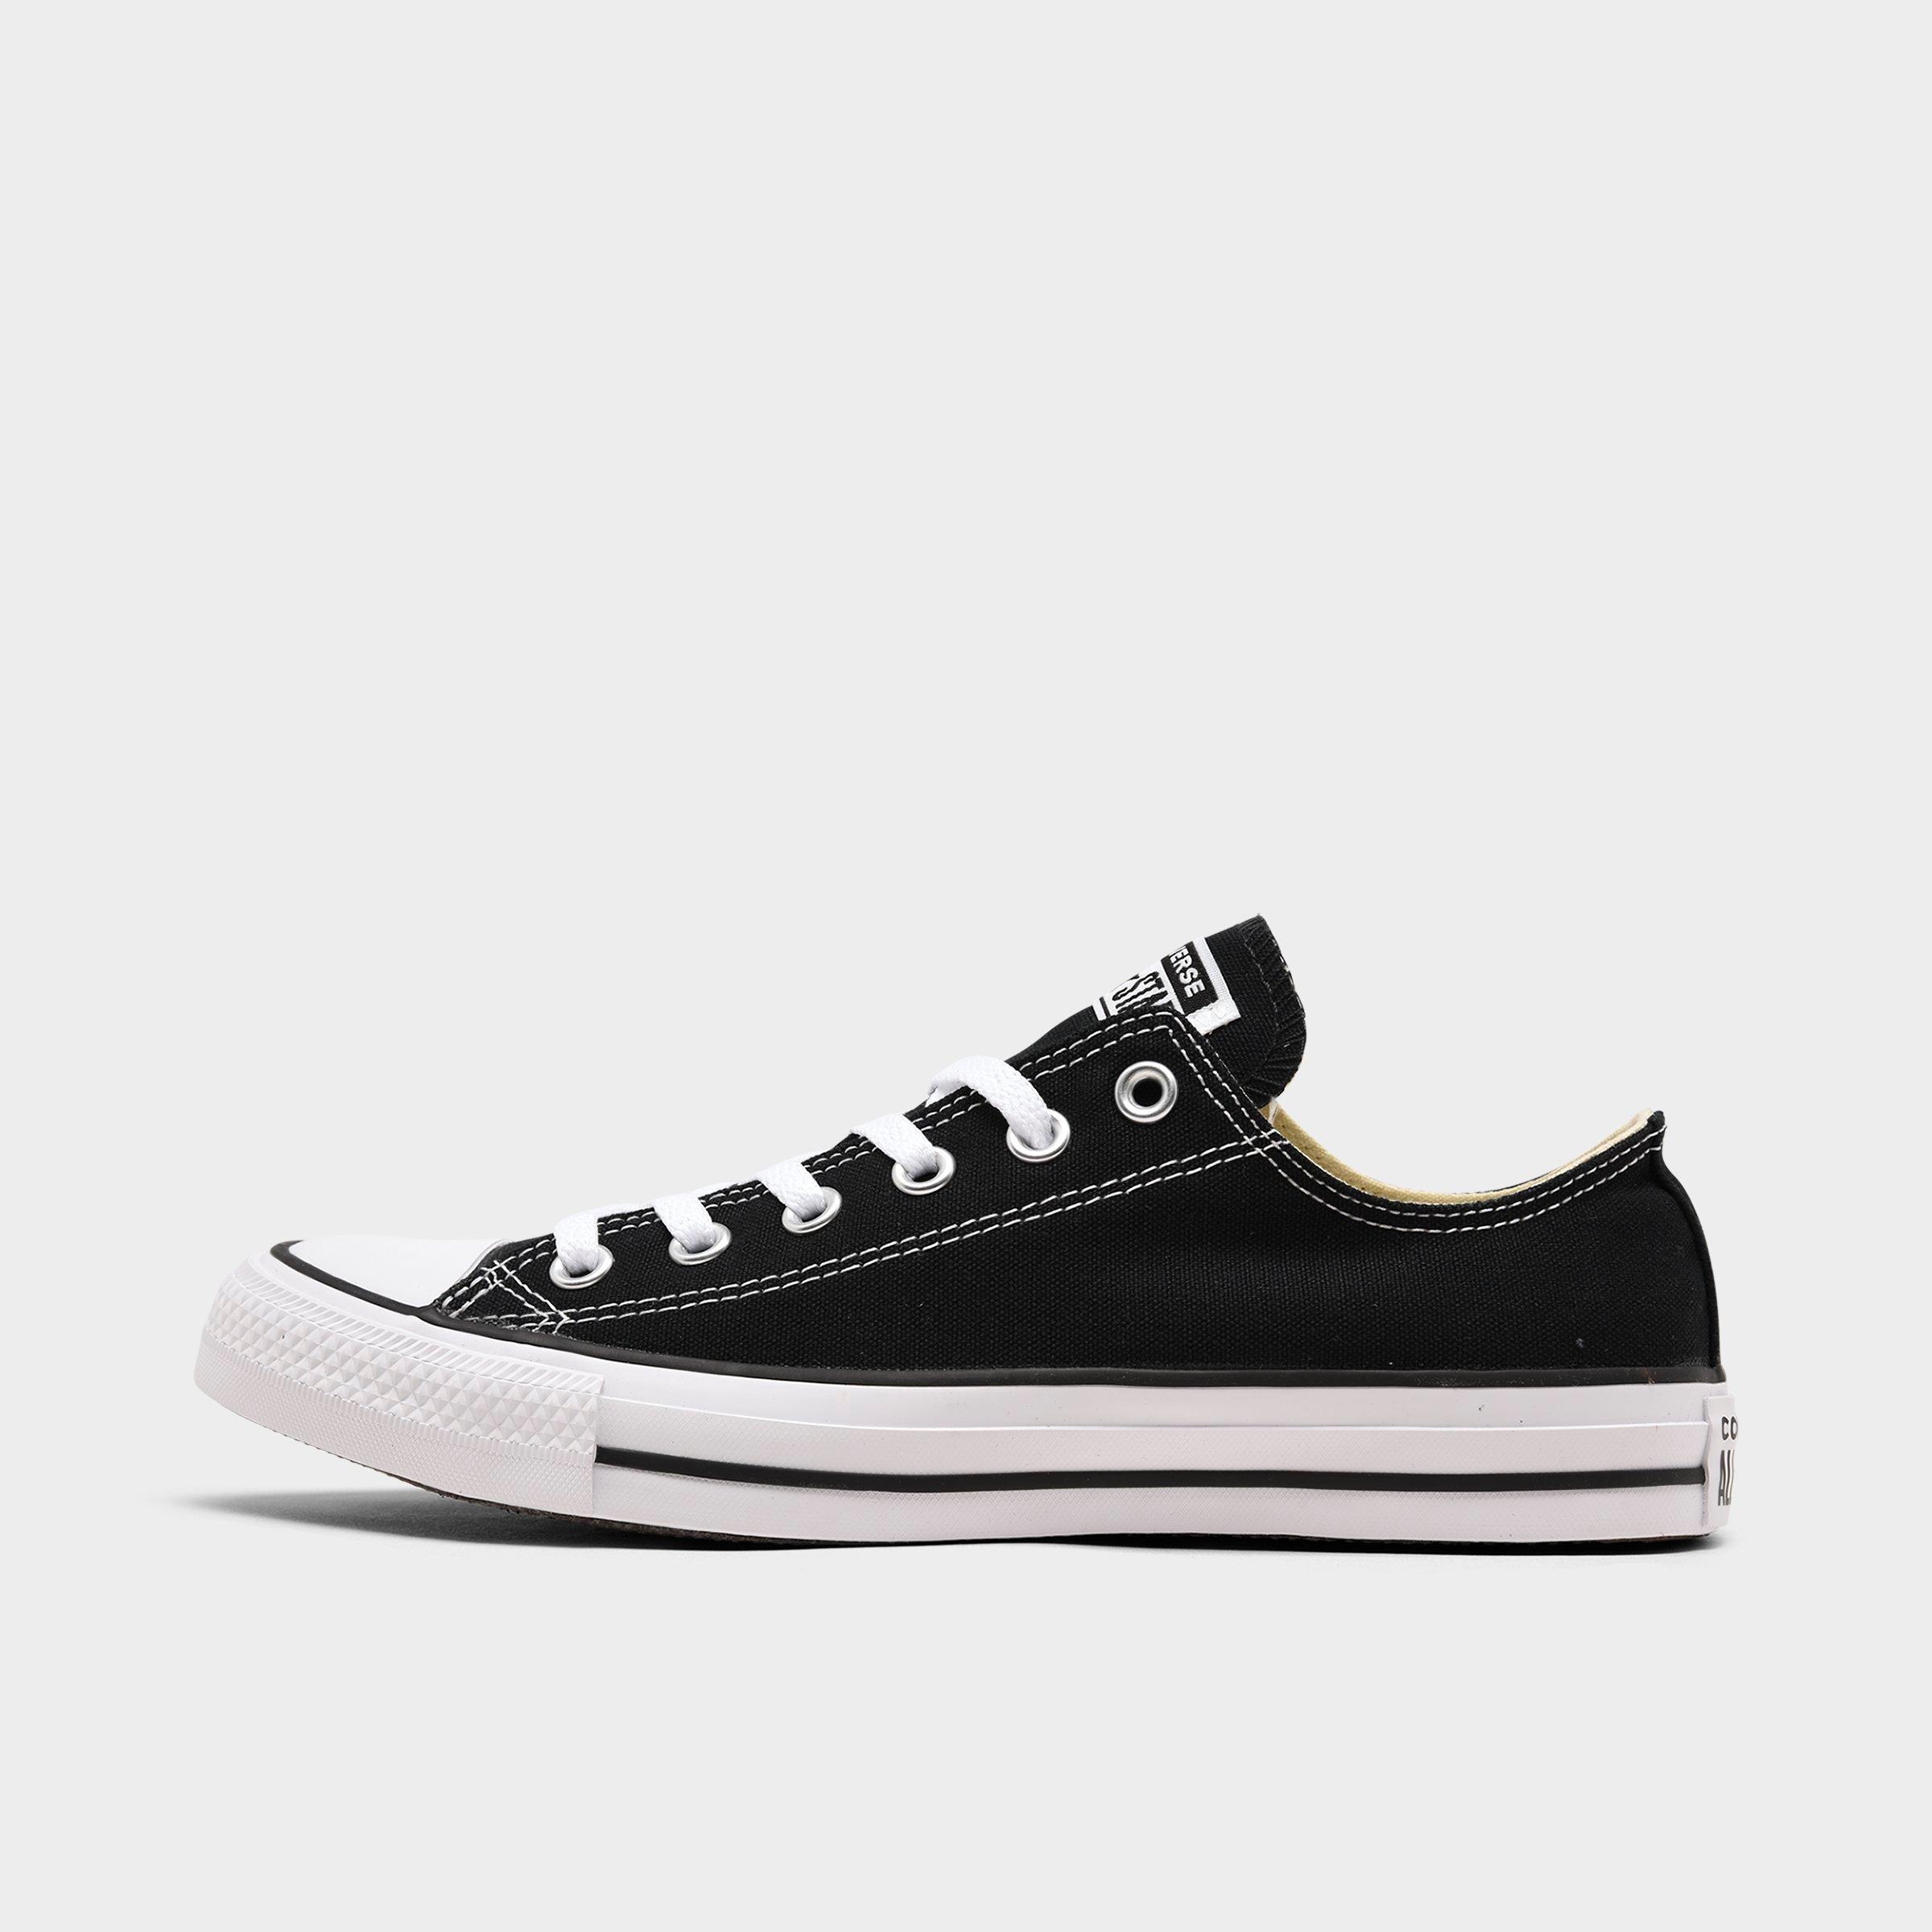 converse trainers sale